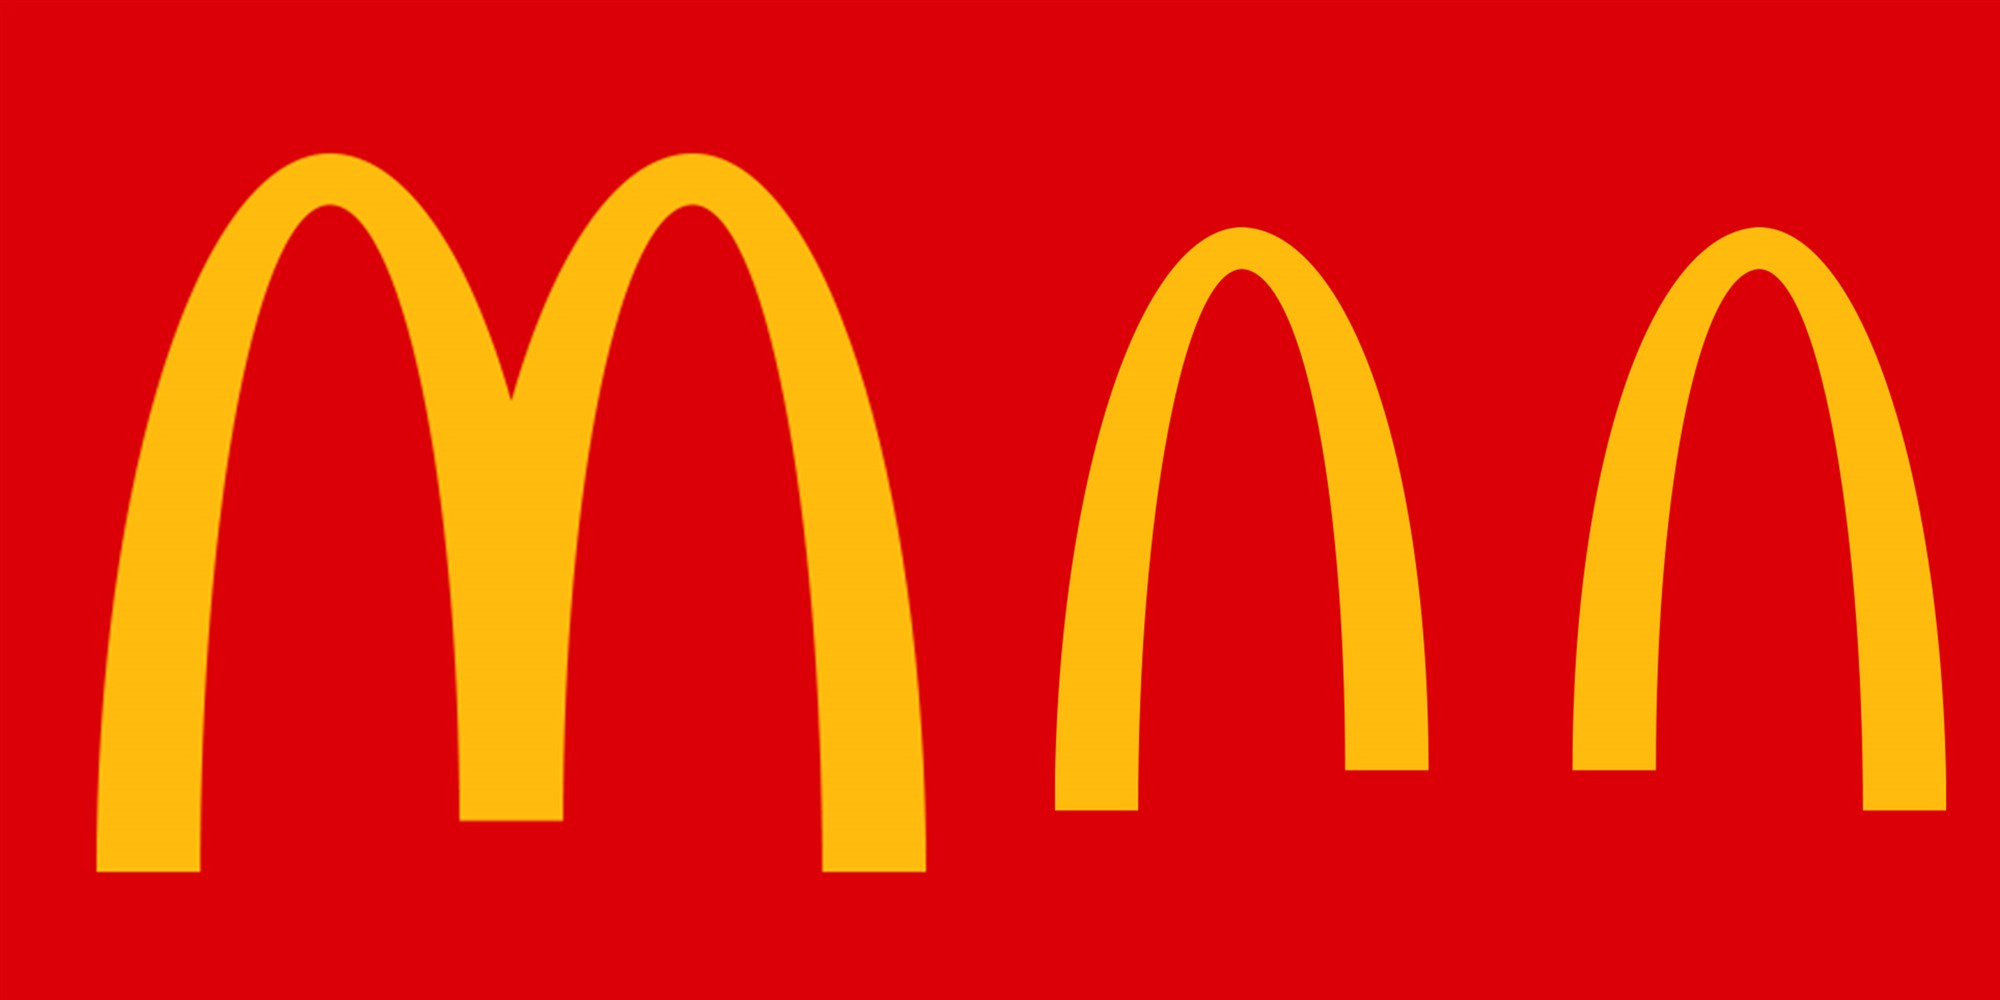 For the first time in 52 years, the golden arches logo resembling an M from McDonalds were separated by the McDonalds’.